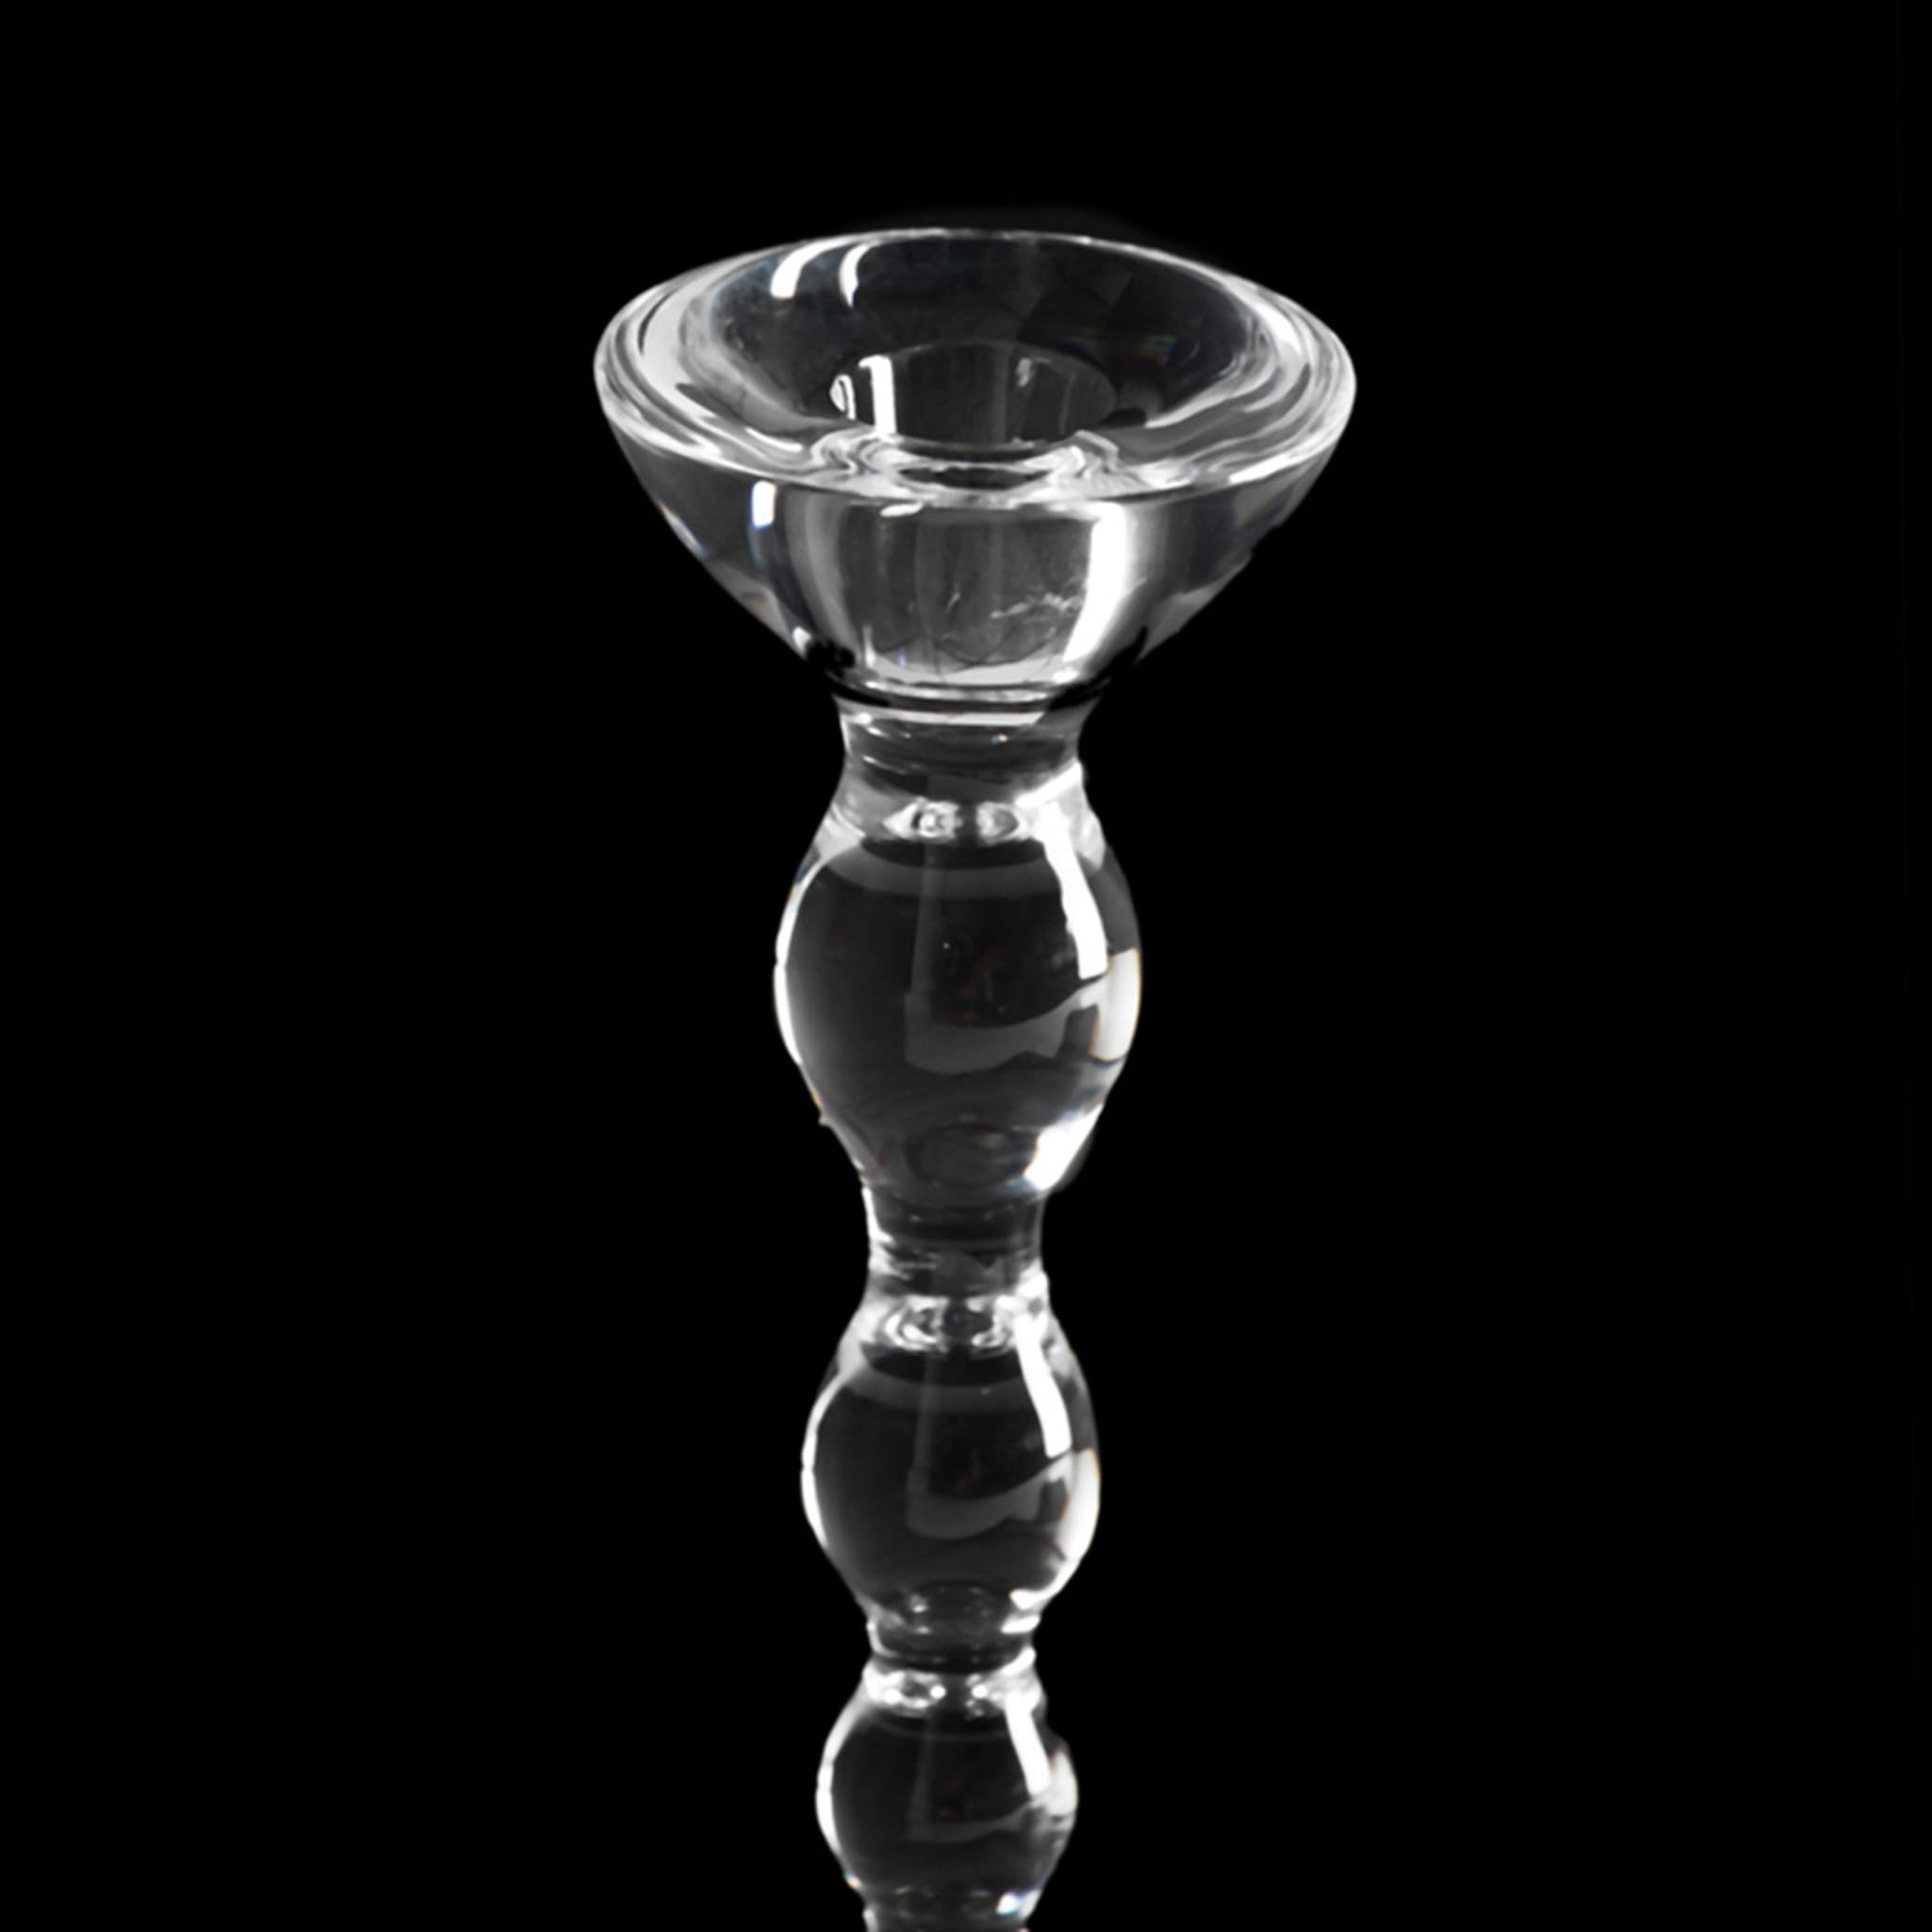 Collier Crystal Candle Holder - Alternative view 3